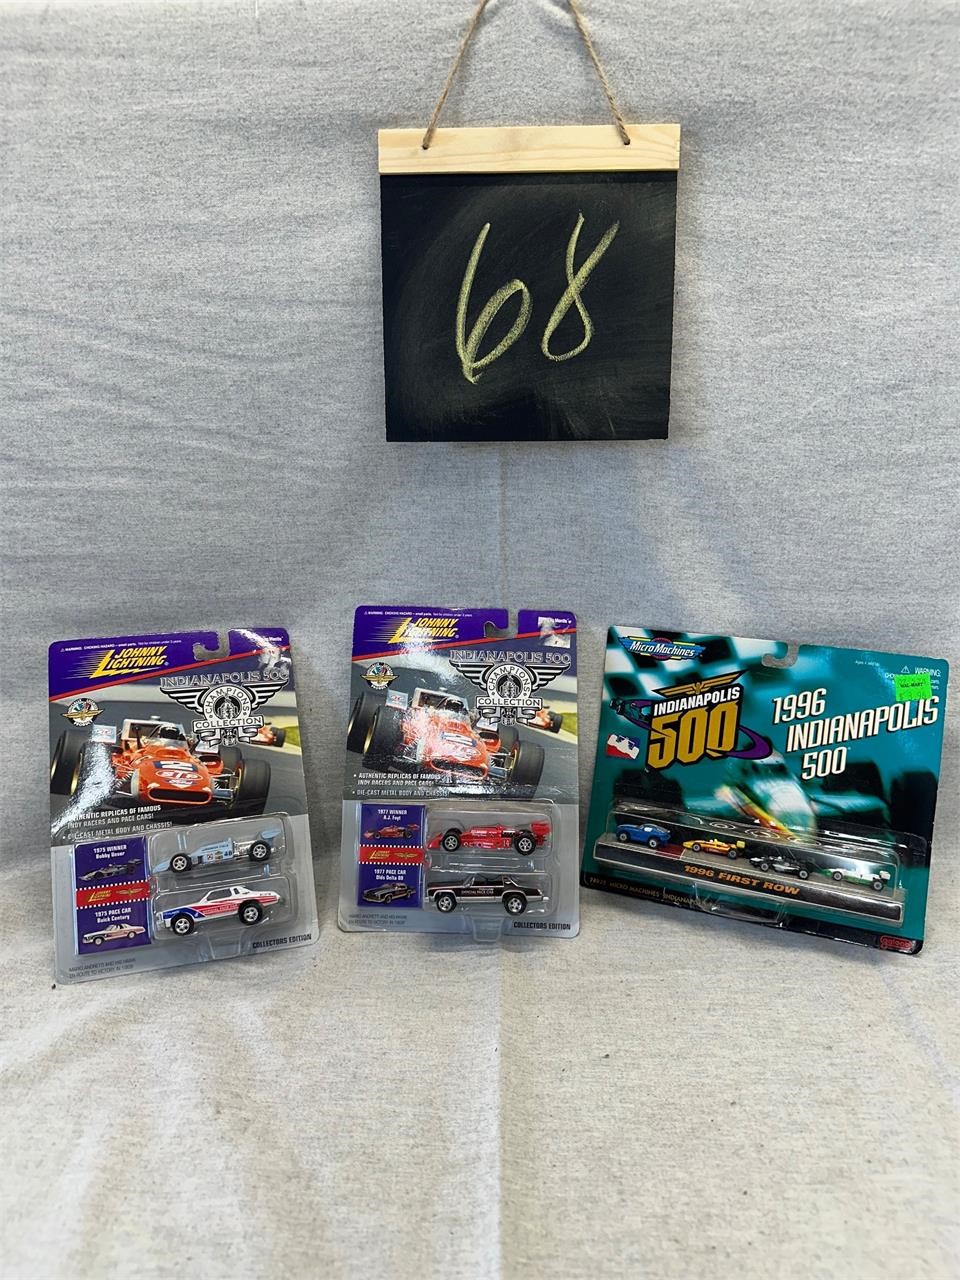 Indianapolis 500 collectible